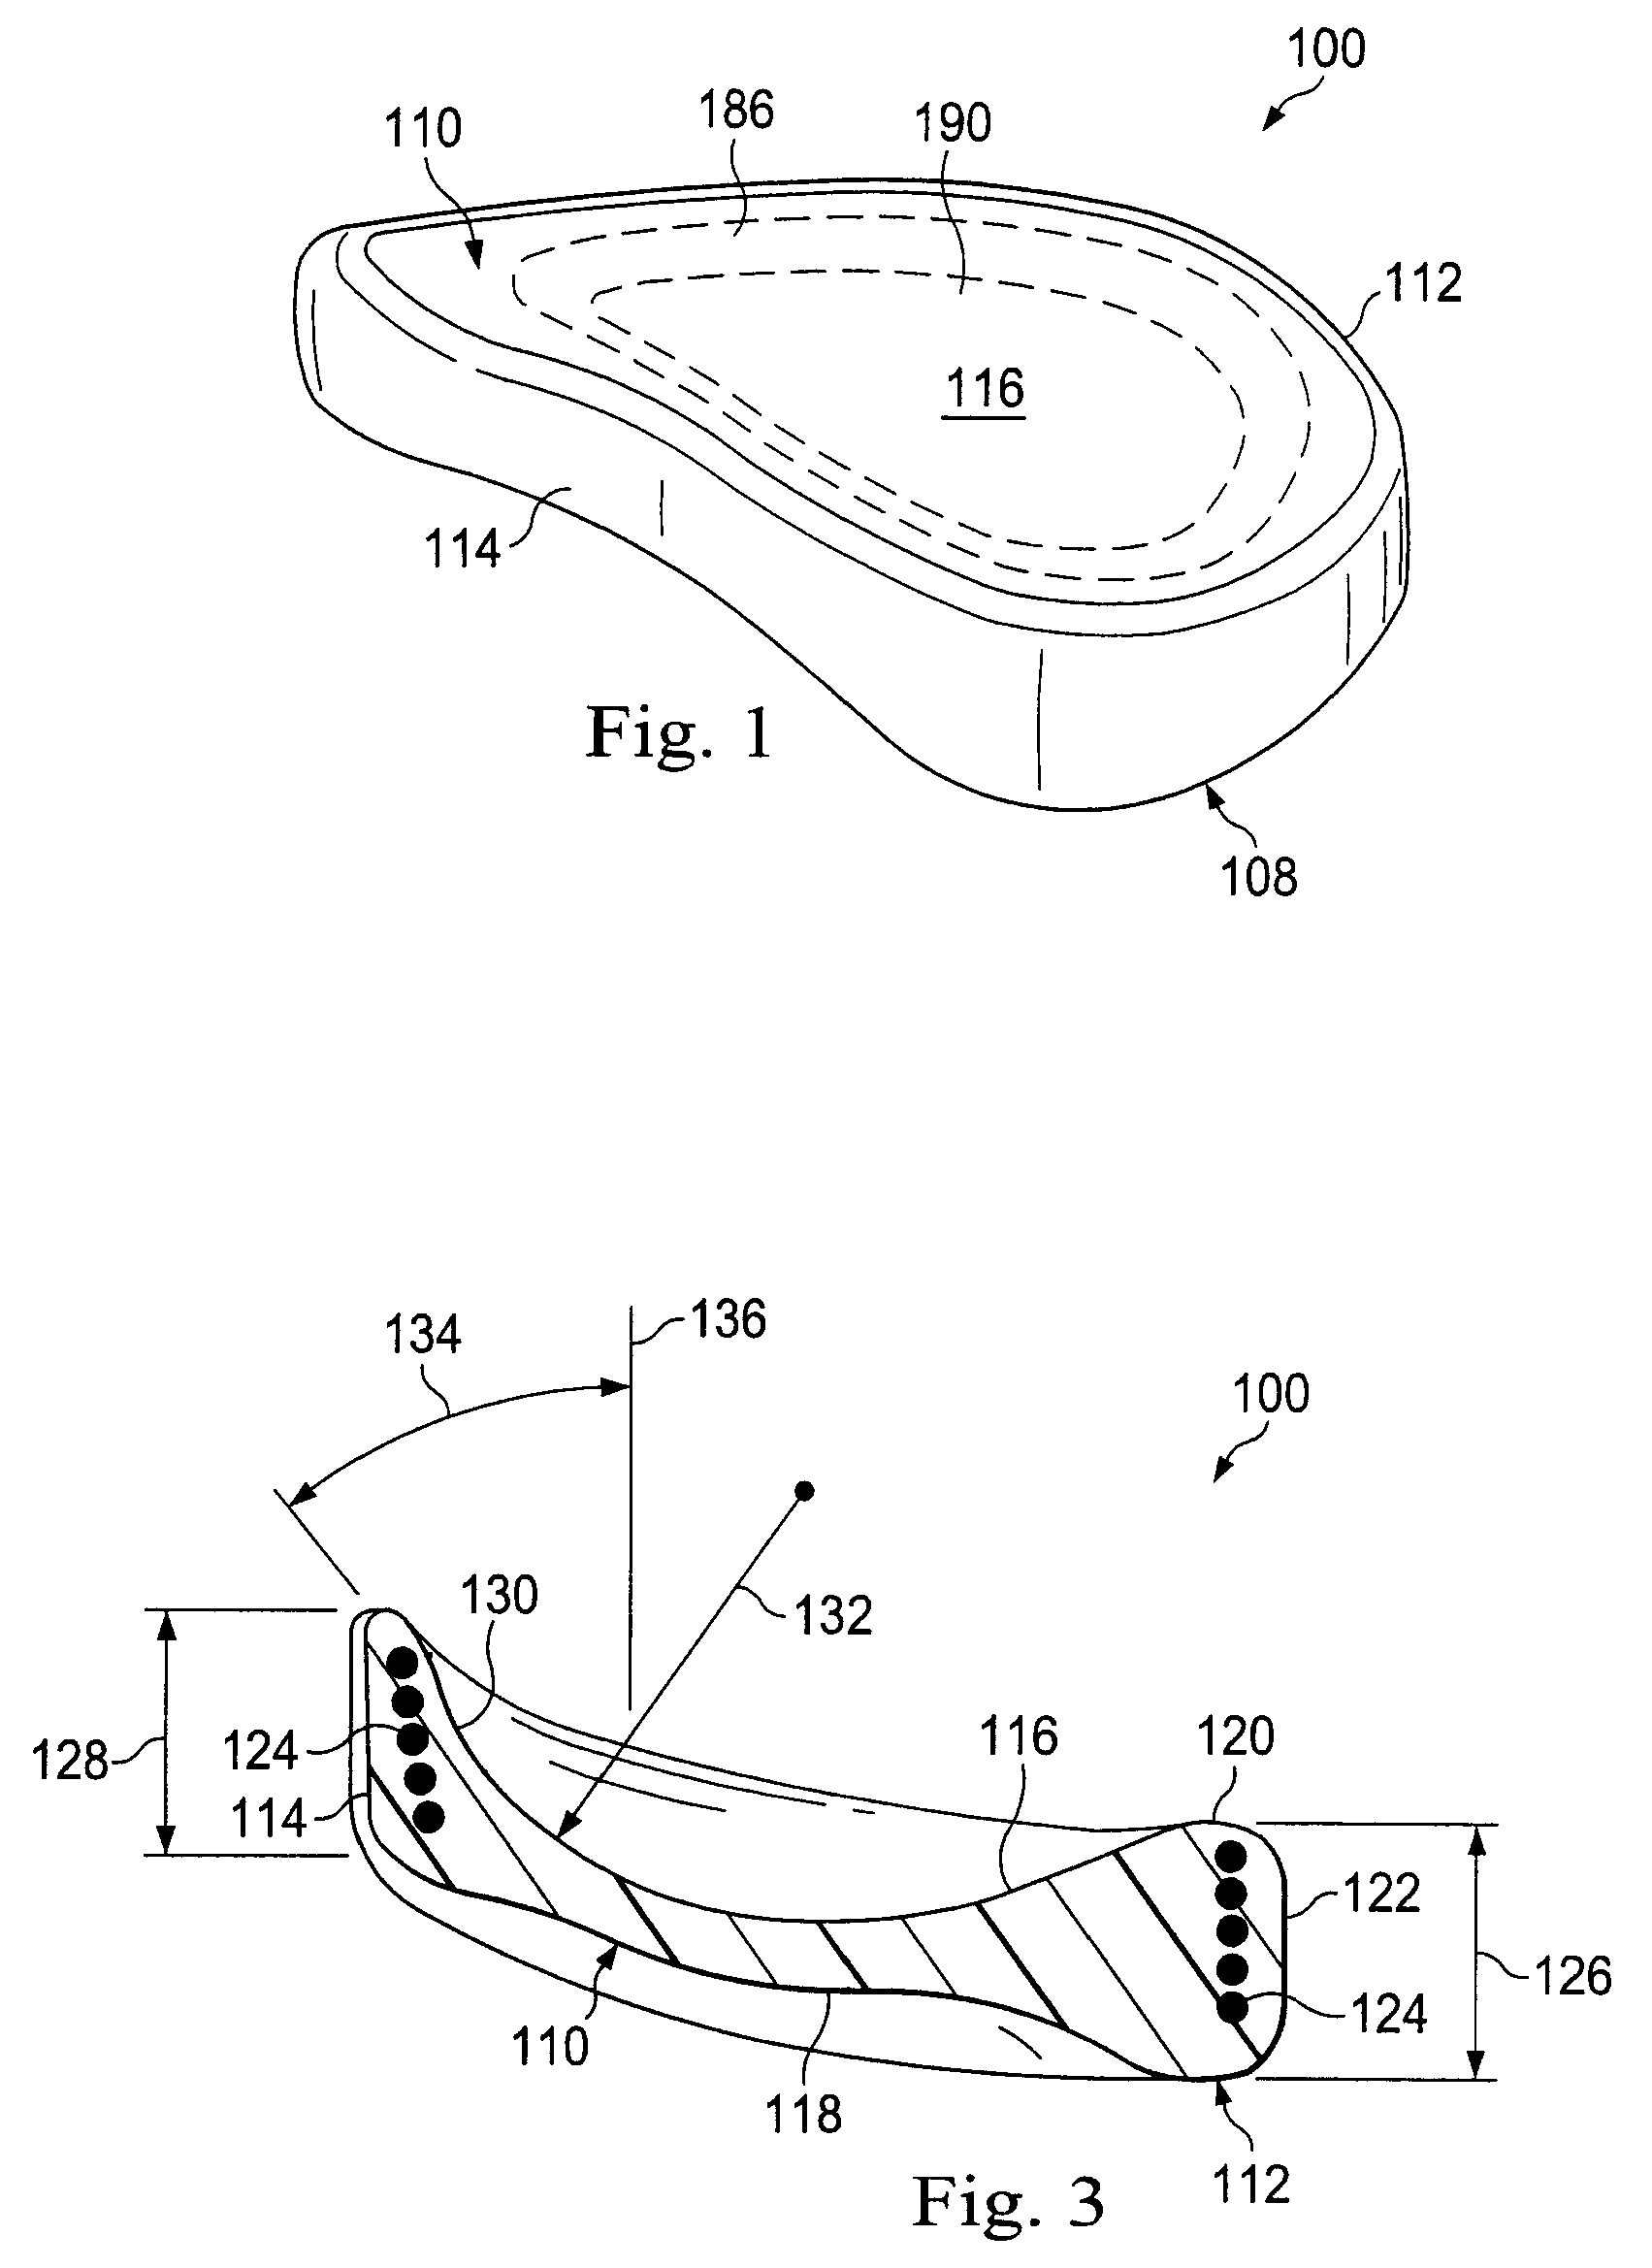 Meniscus prosthetic device selection and implantation methods